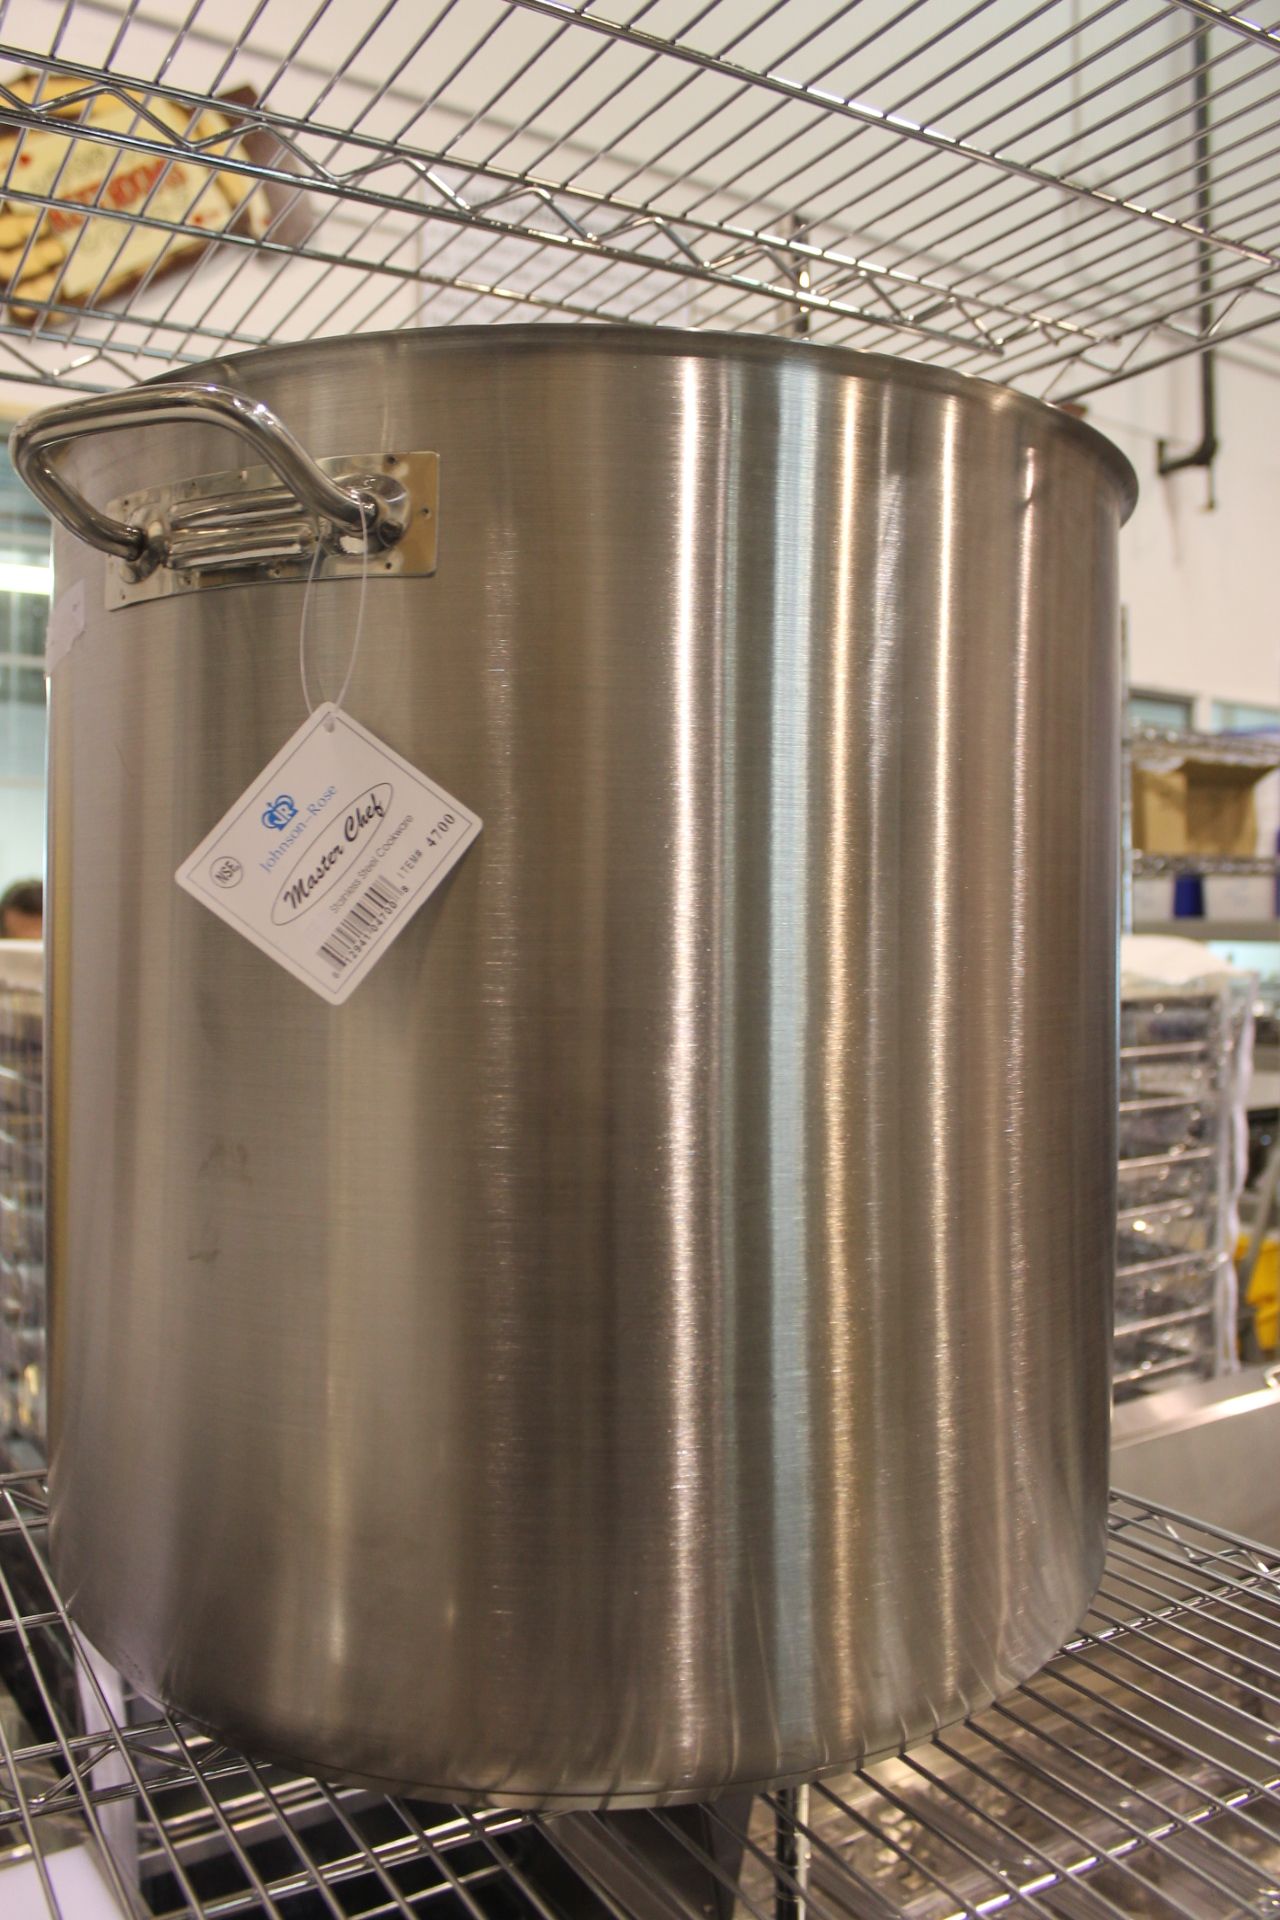 100 qt Heavy Duty Stainless Stock Pot, 19-7/8" dia. x 20-1/8" deep  (no lid)  induction ready